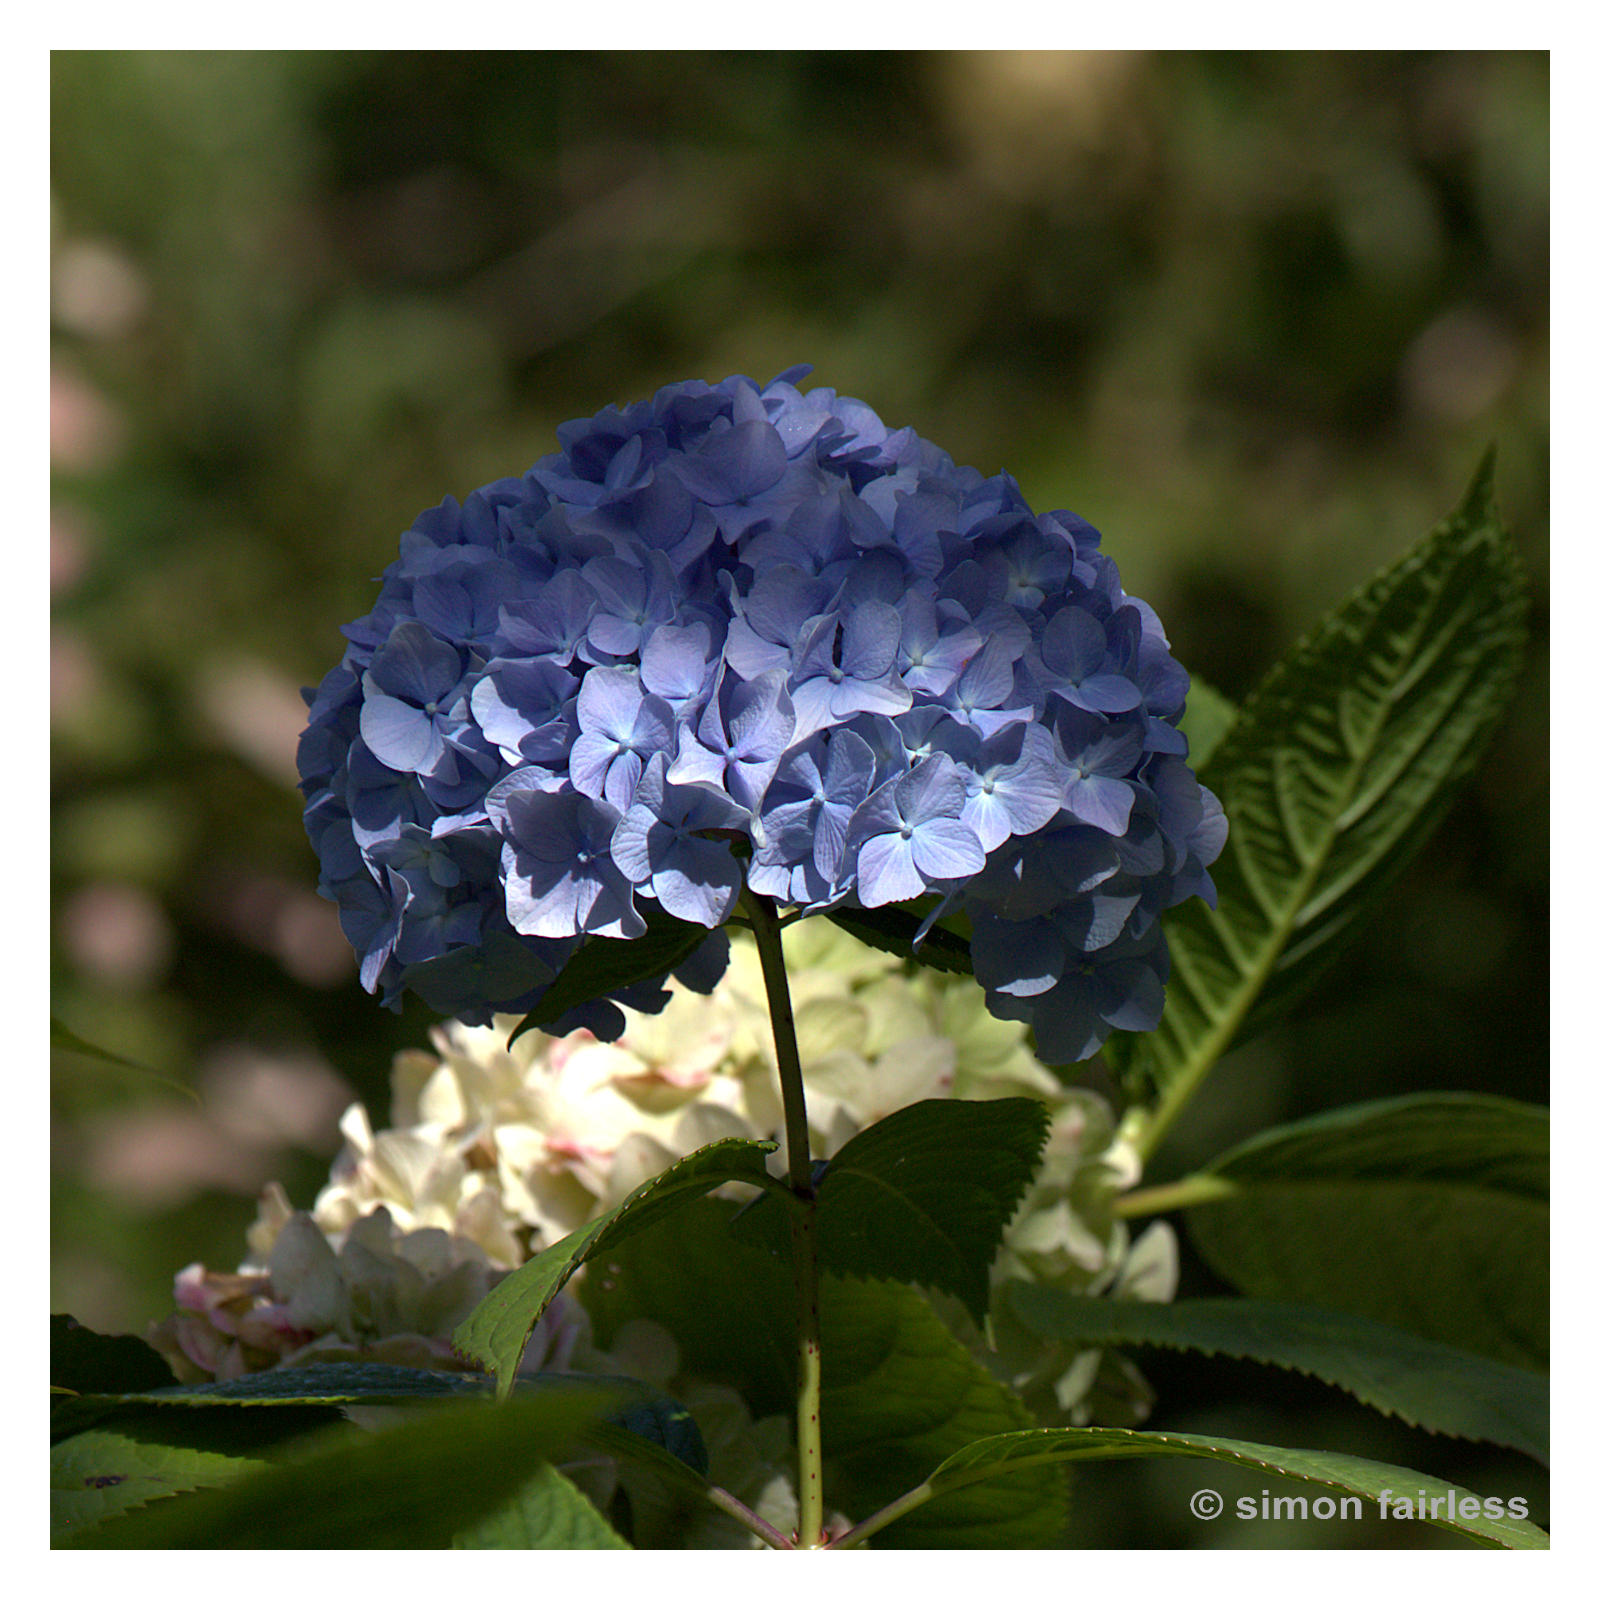 Floral Image of hydrangea flower